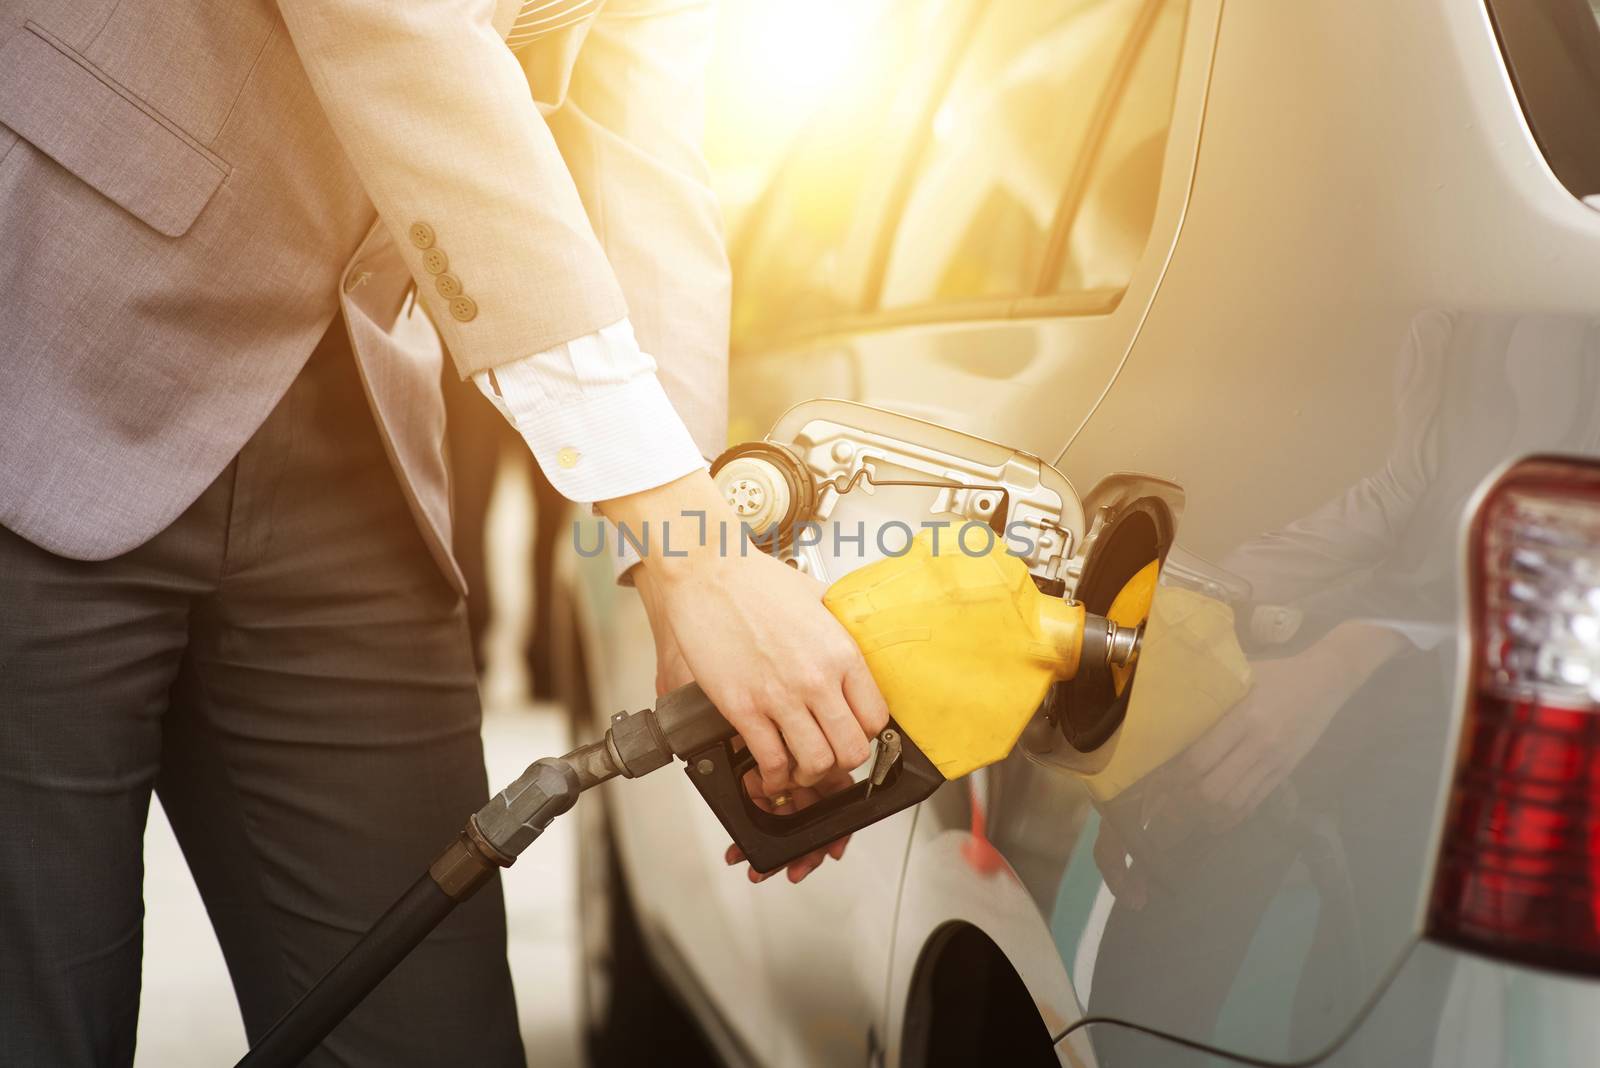 Refilling gas. Close up of man pumping gasoline fuel in car at petrol station.